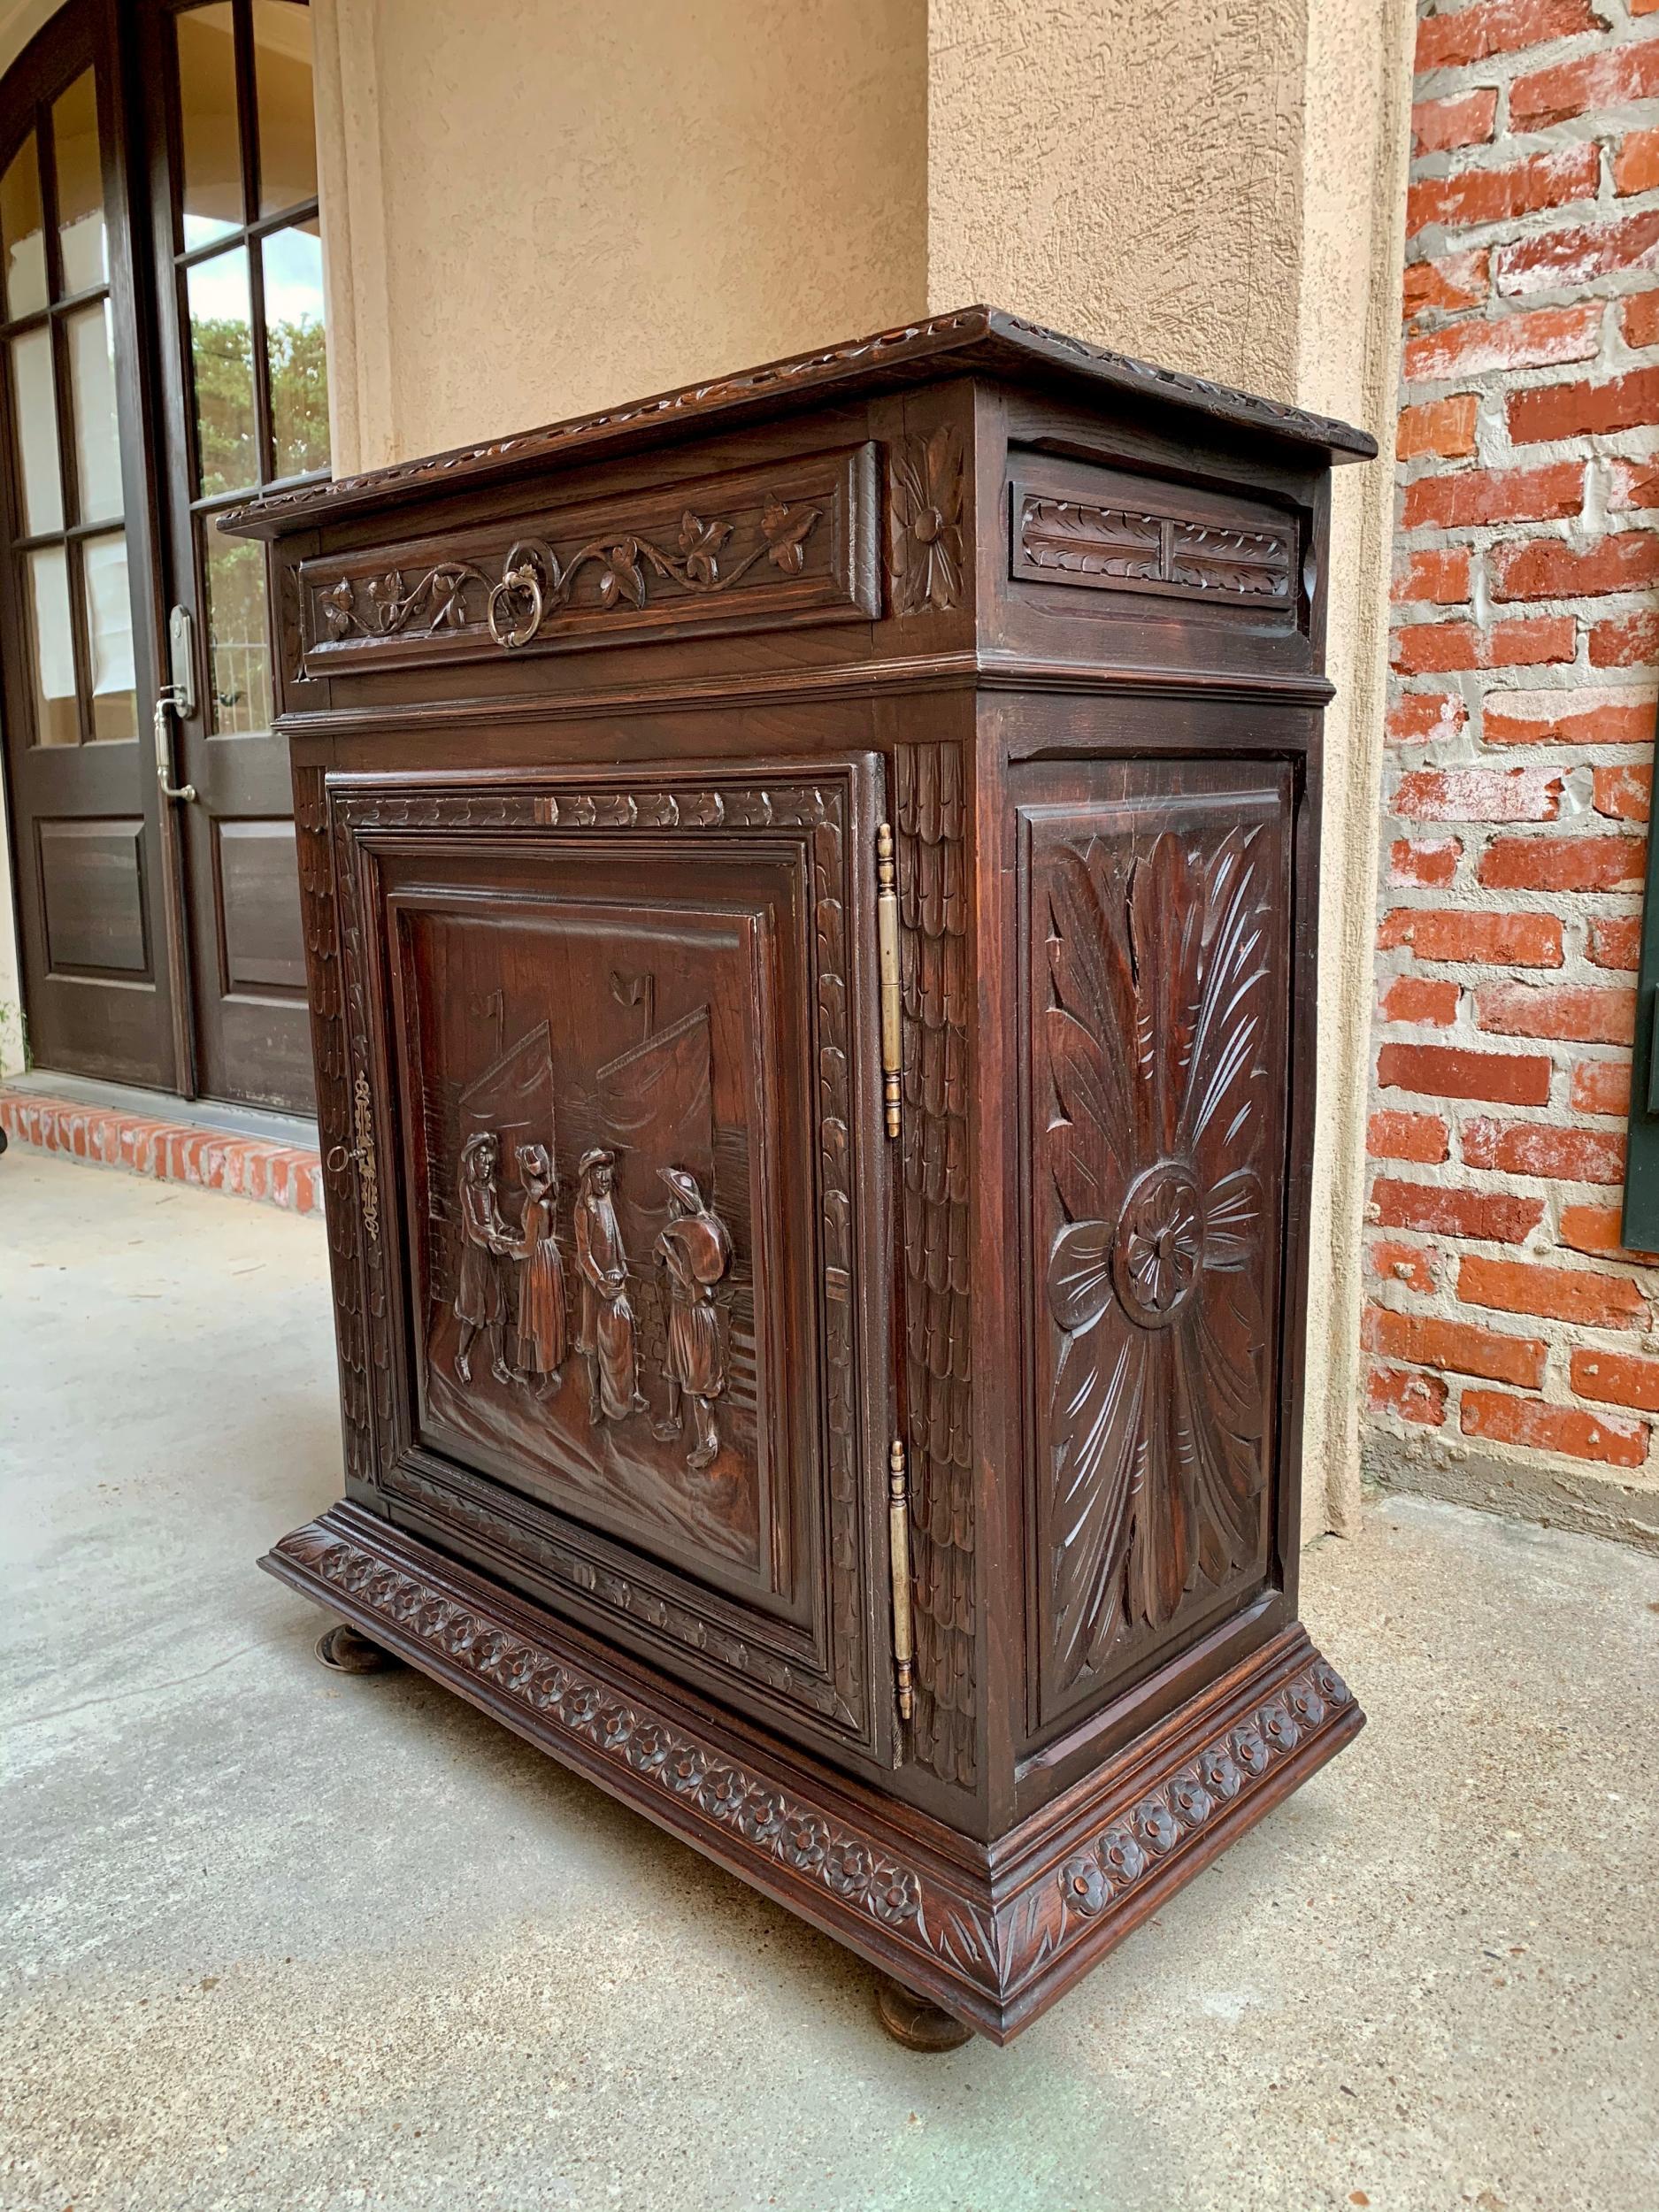 19th century antique French carved oak Confiturier Jam Cabinet Breton Brittany

~ Direct from France
~ Ornately hand carved antique French ‘confiturier’ or jam cabinet
~ These cabinets are one of your most requested antiques, as they have so